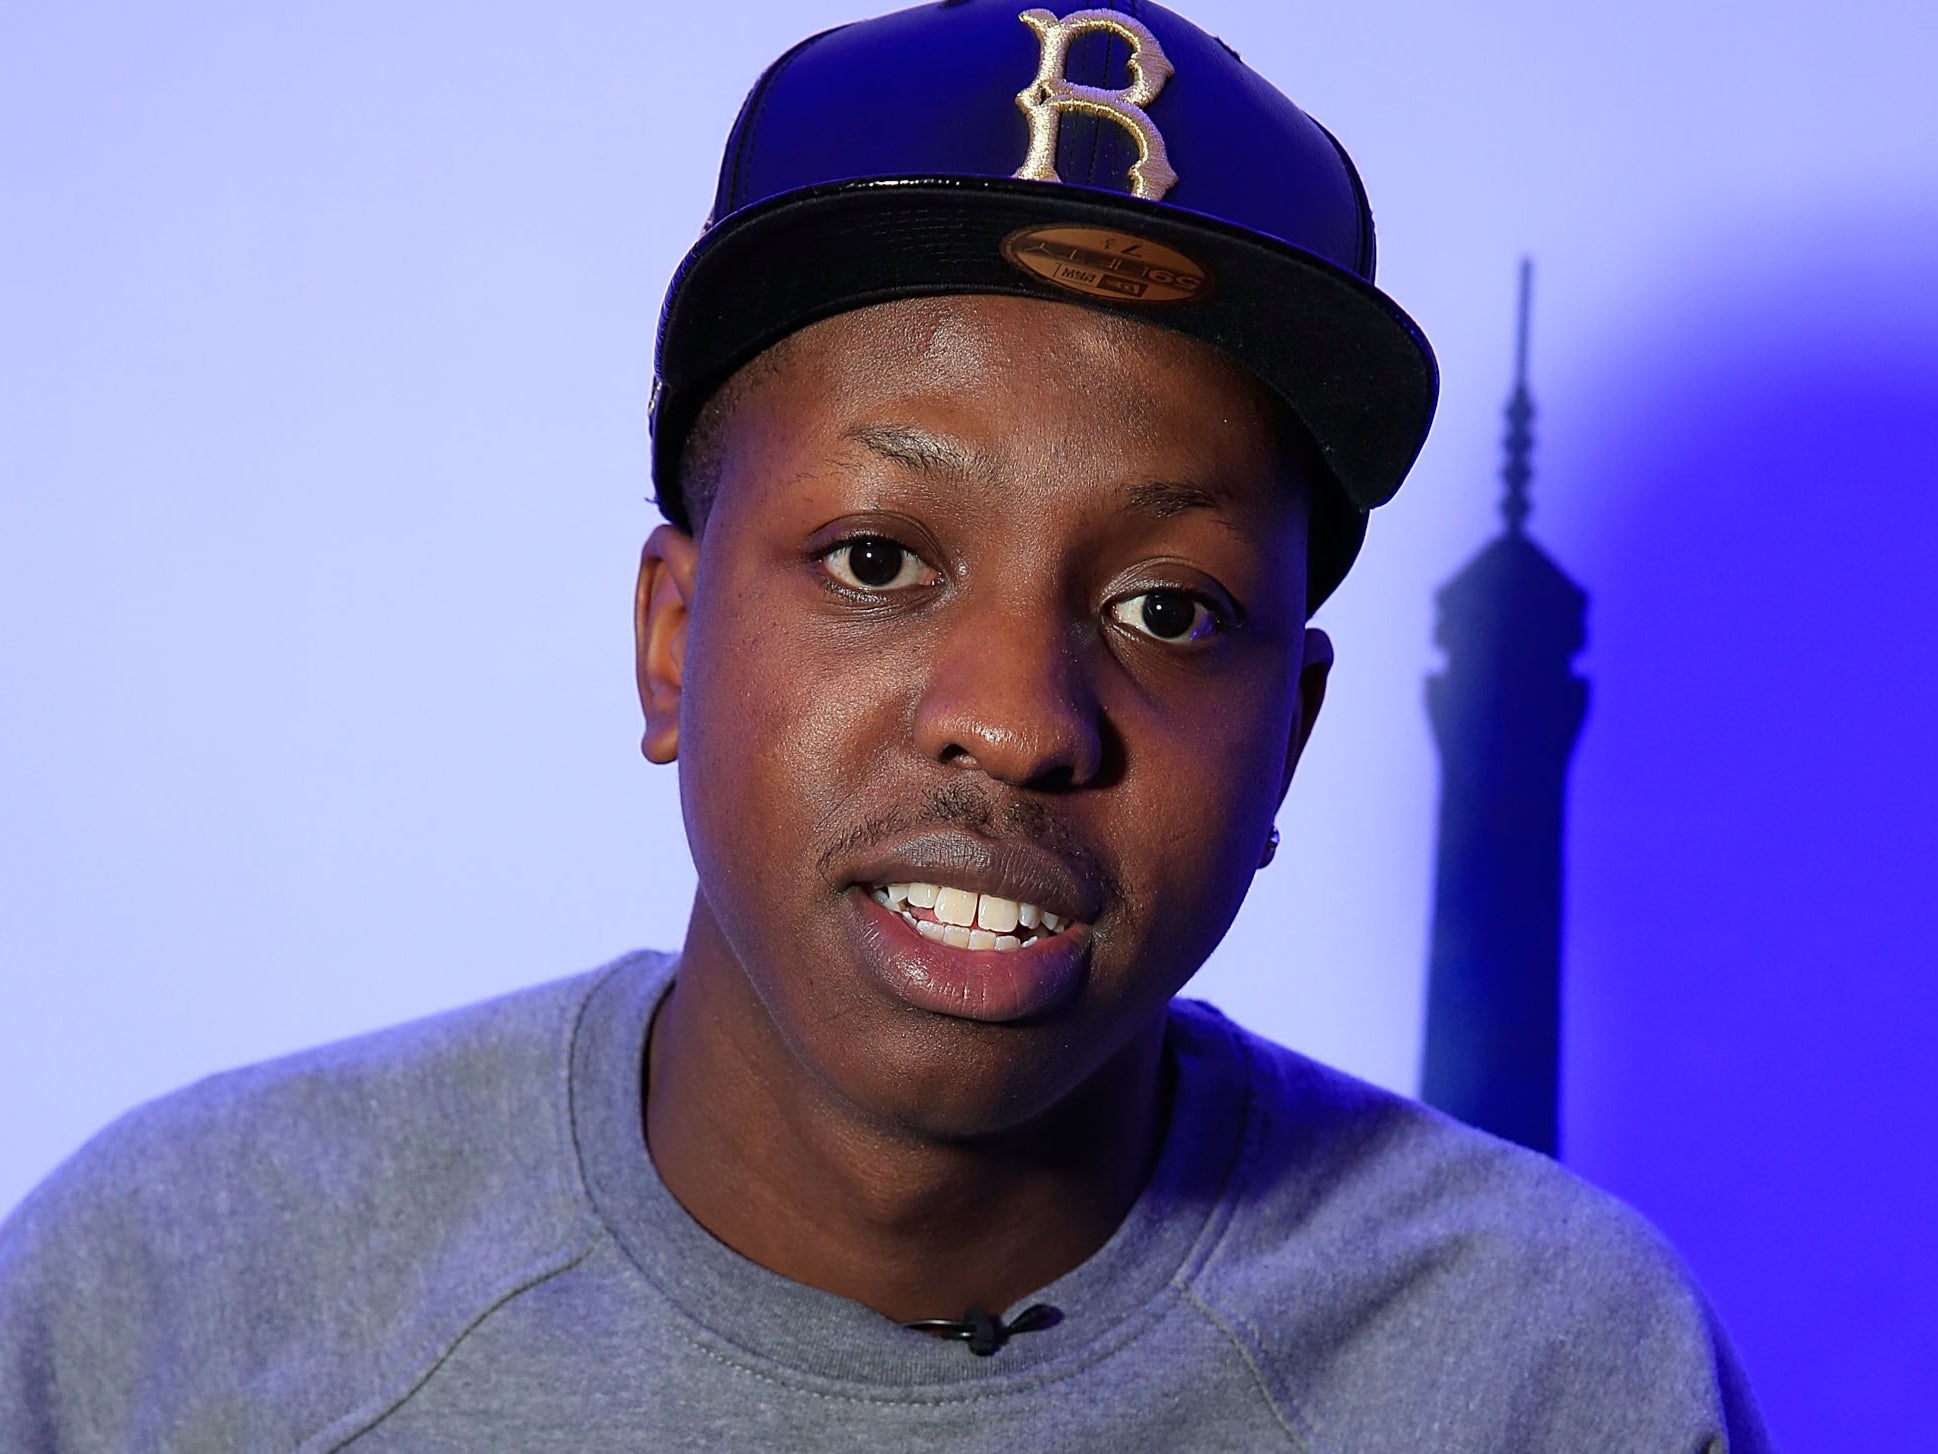 ‘Trailblazer’ Jamal Edwards launched the careers of many chart-topping stars